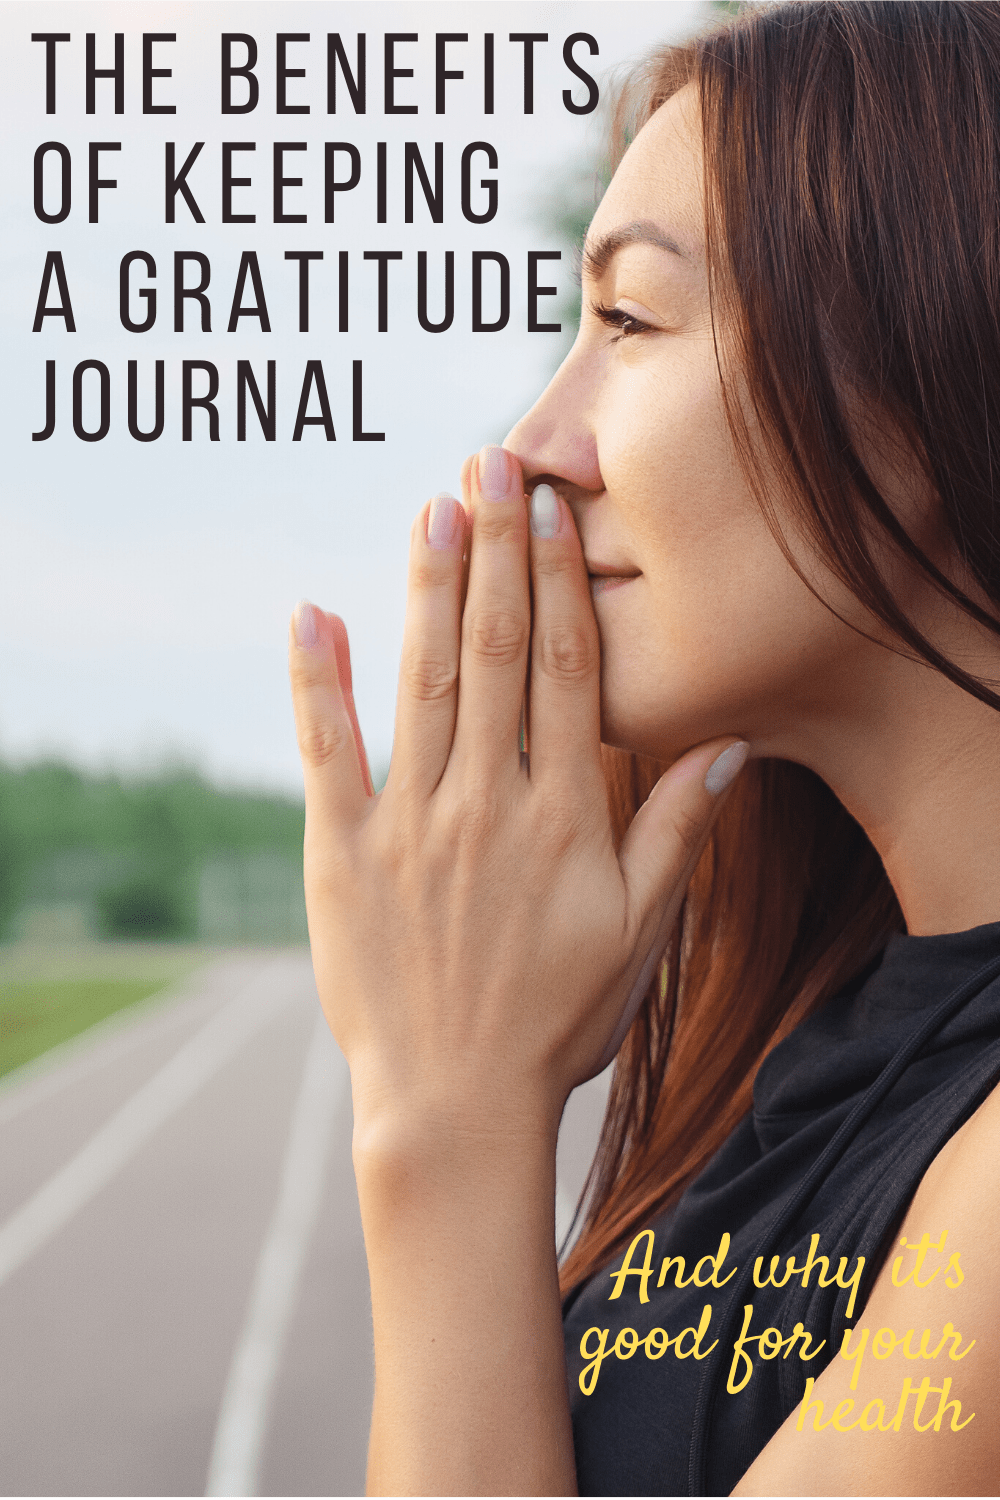 Being grateful is good for your mental and physical health - so find out how to keep a gratitude journal and get started today!